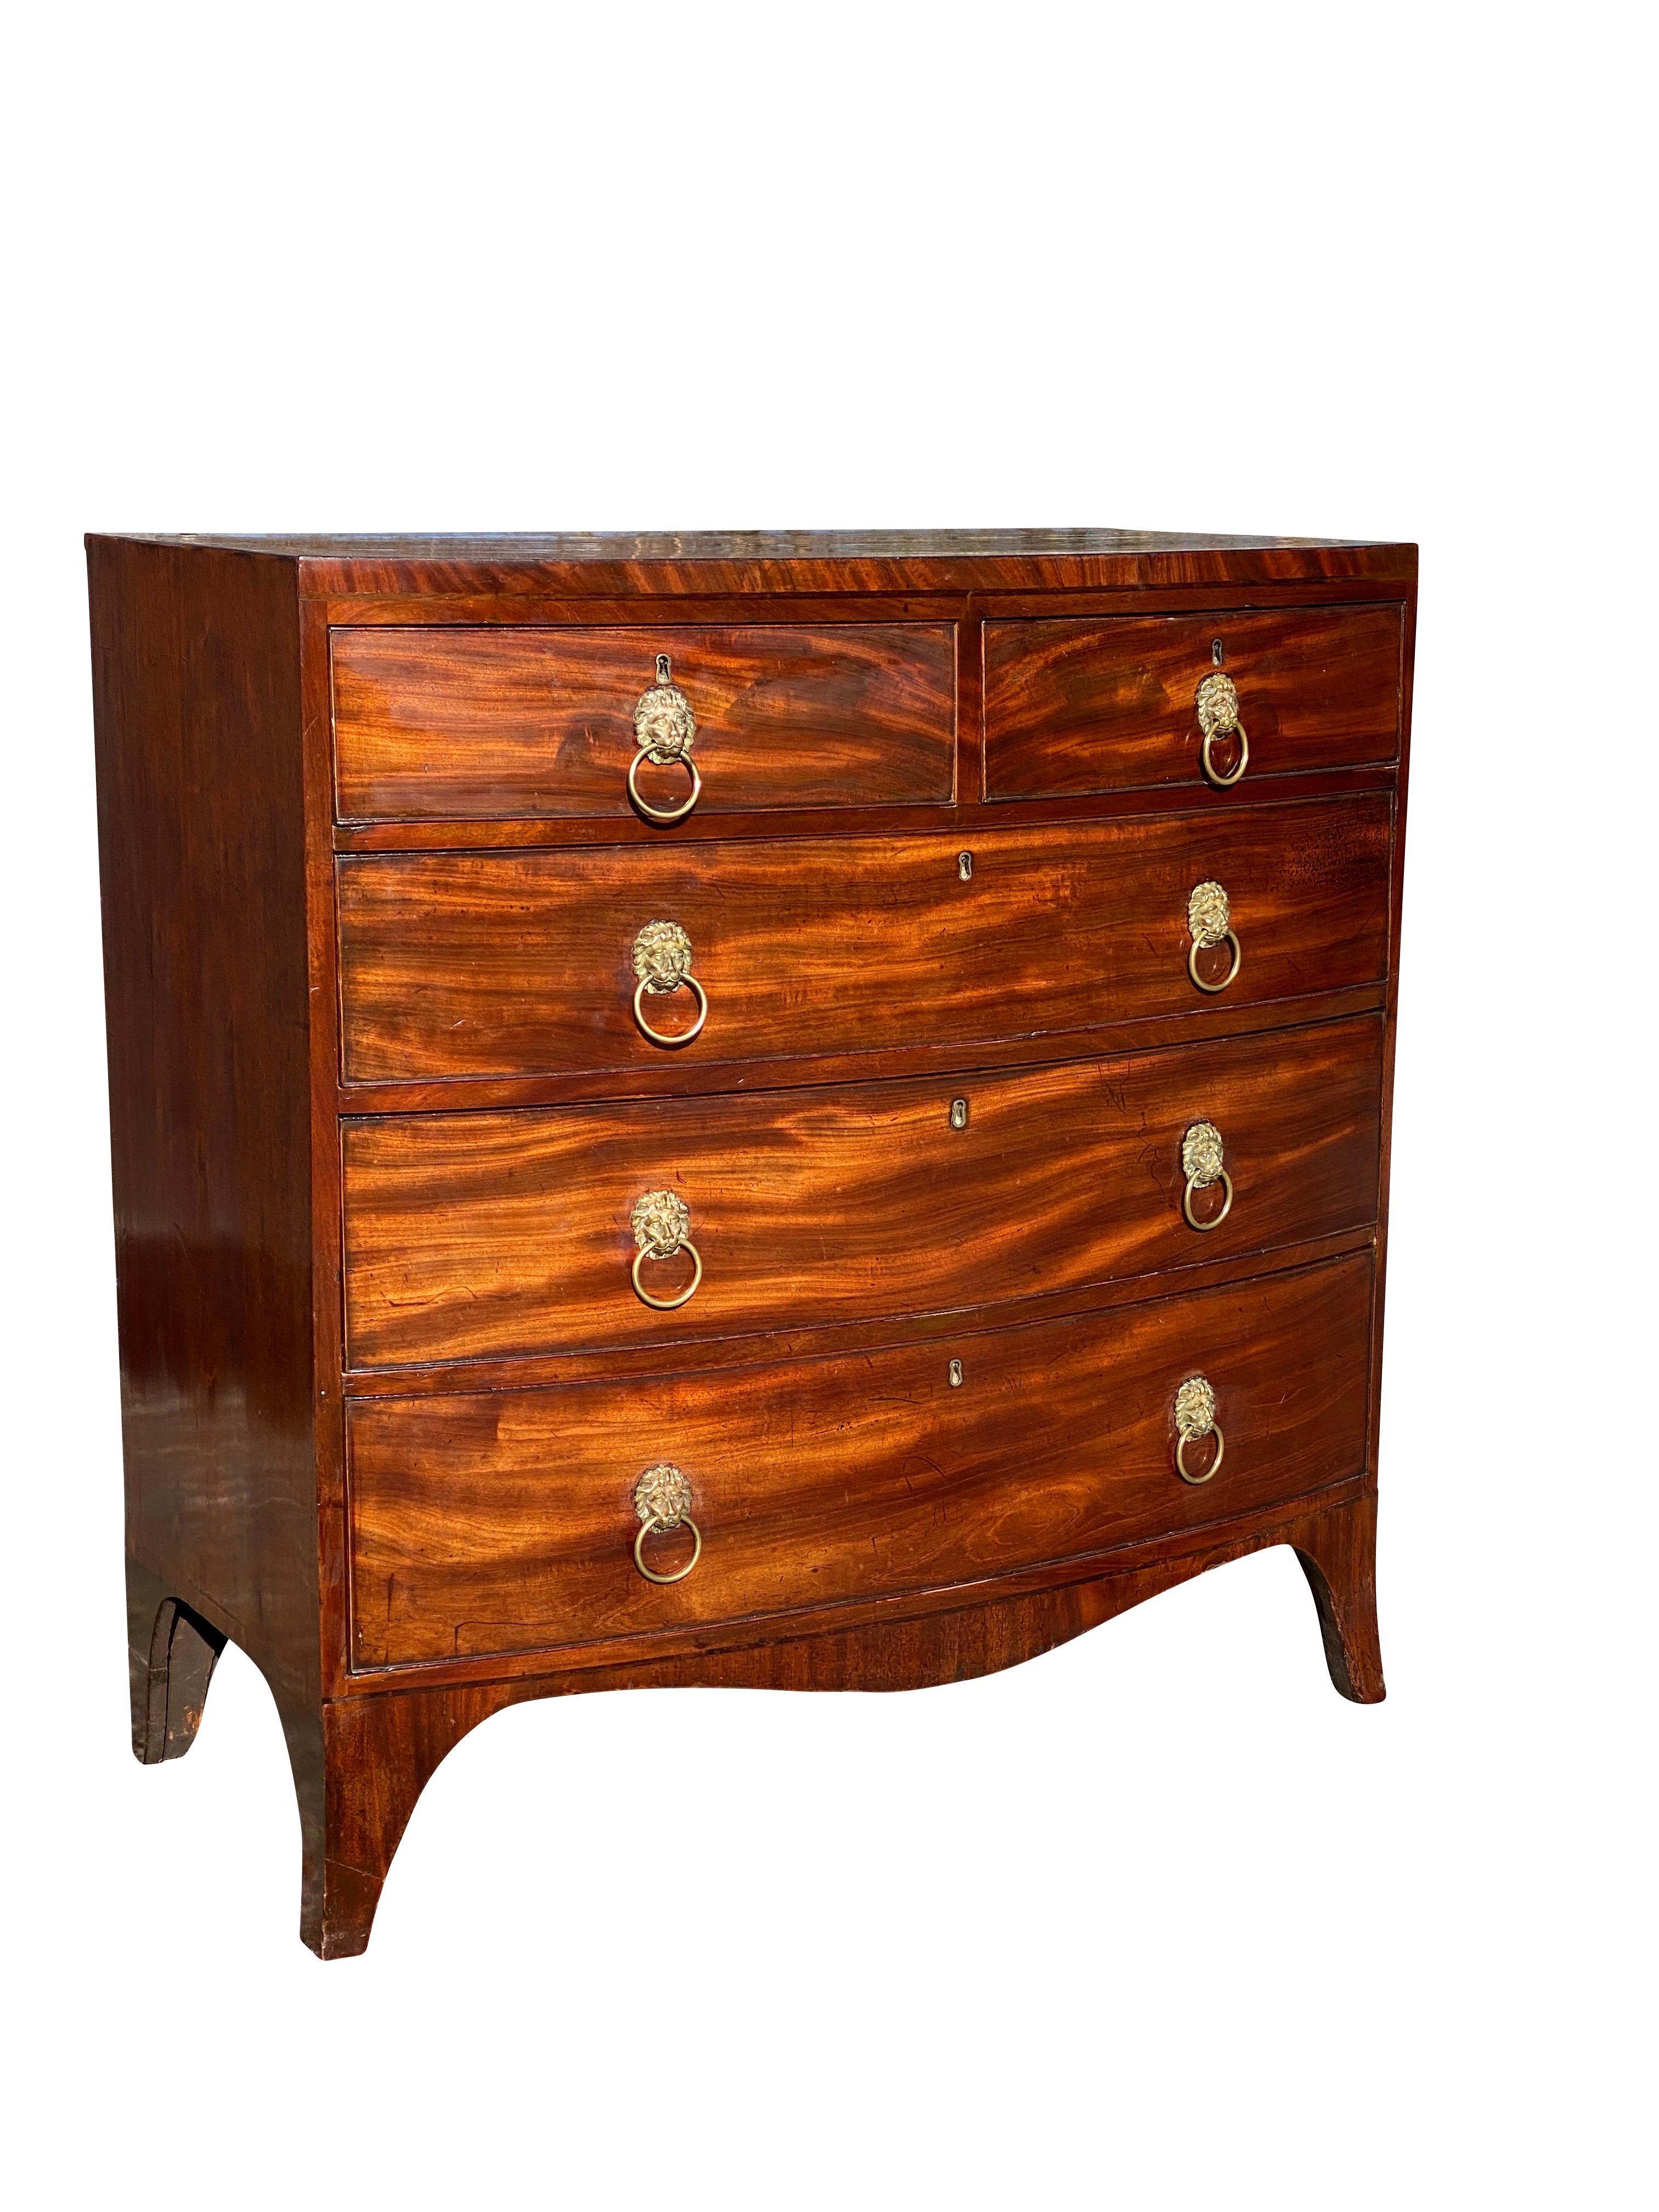 With bowed top over two short drawers over three long drawers, all drawers with brass lions head pulls. Splayed feet.